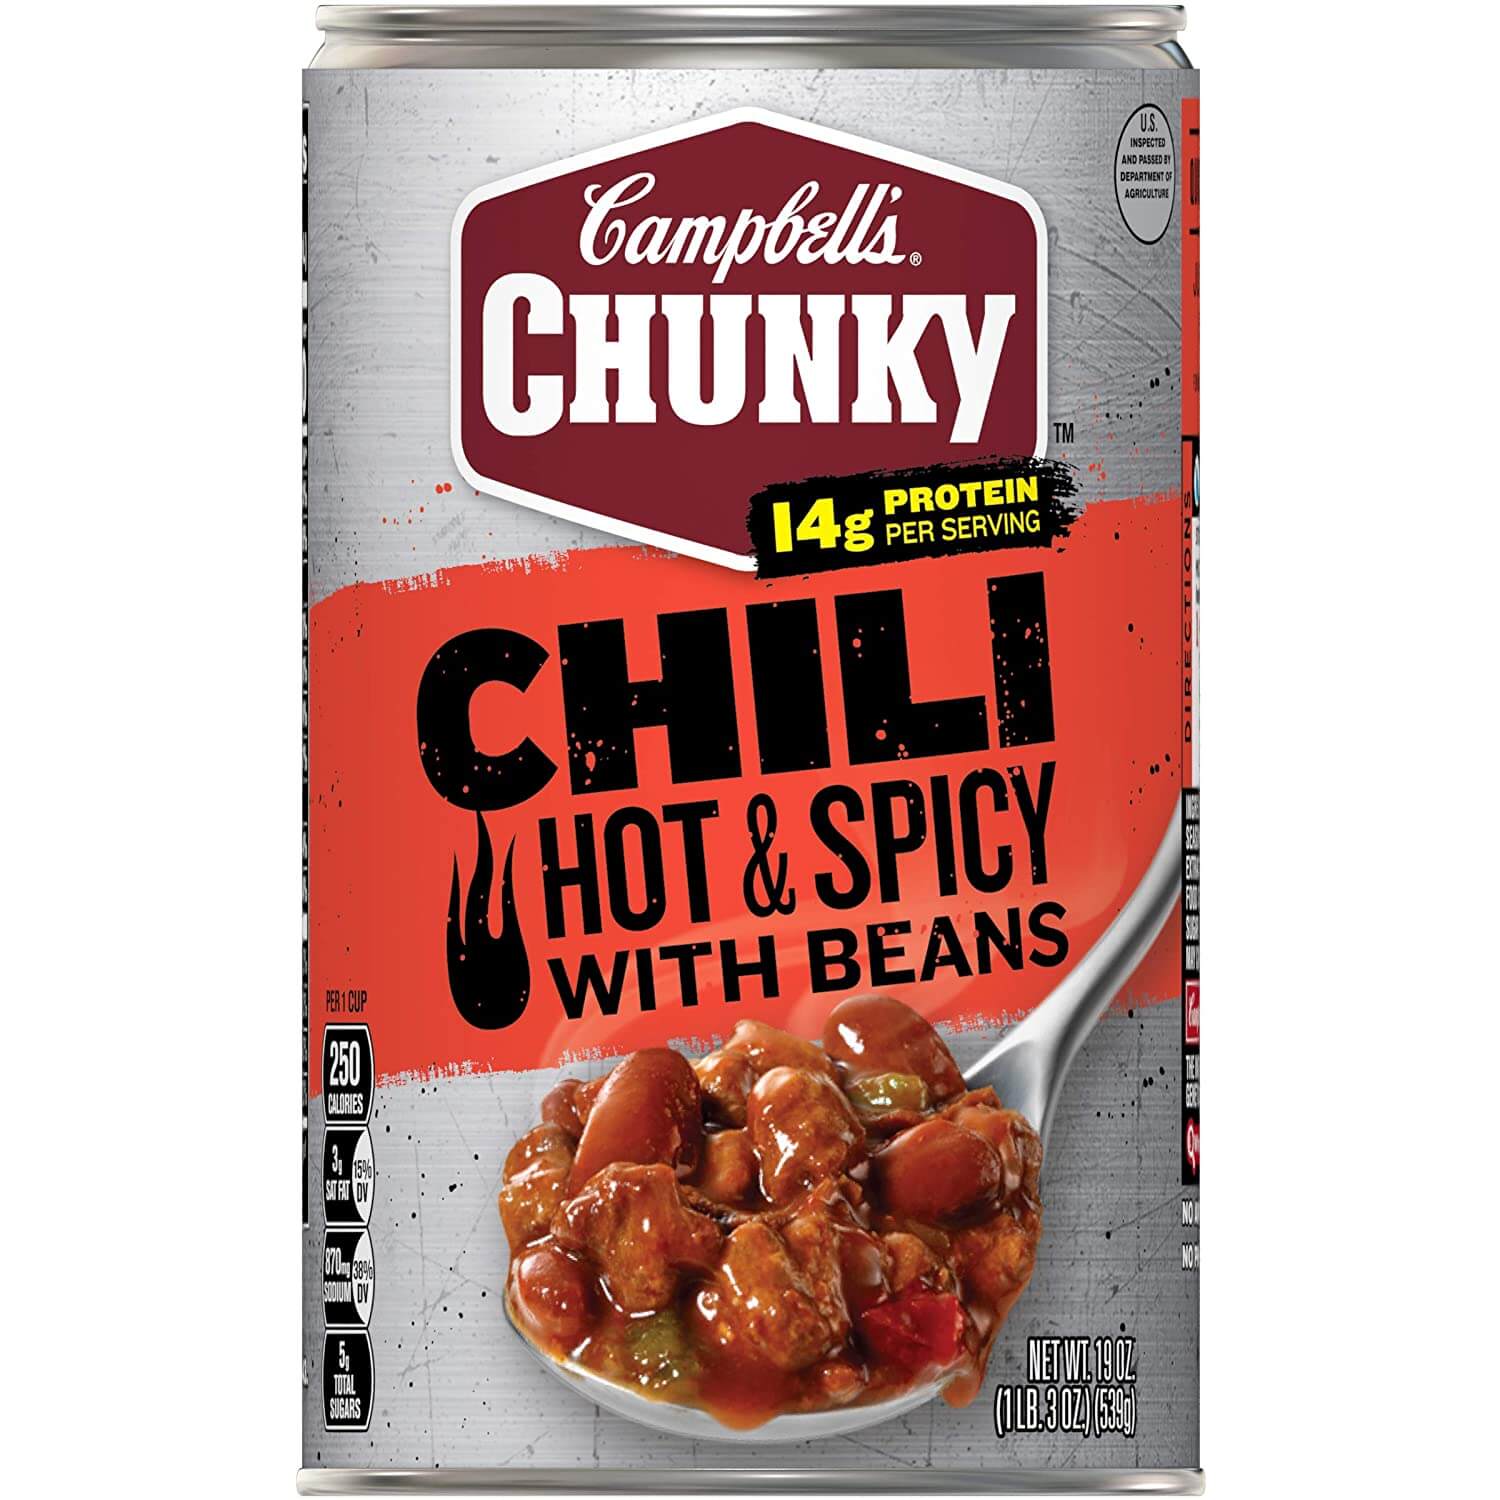 Campbell’s Chunky Chili, Hot & Spicy Beef & Bean Firehouse